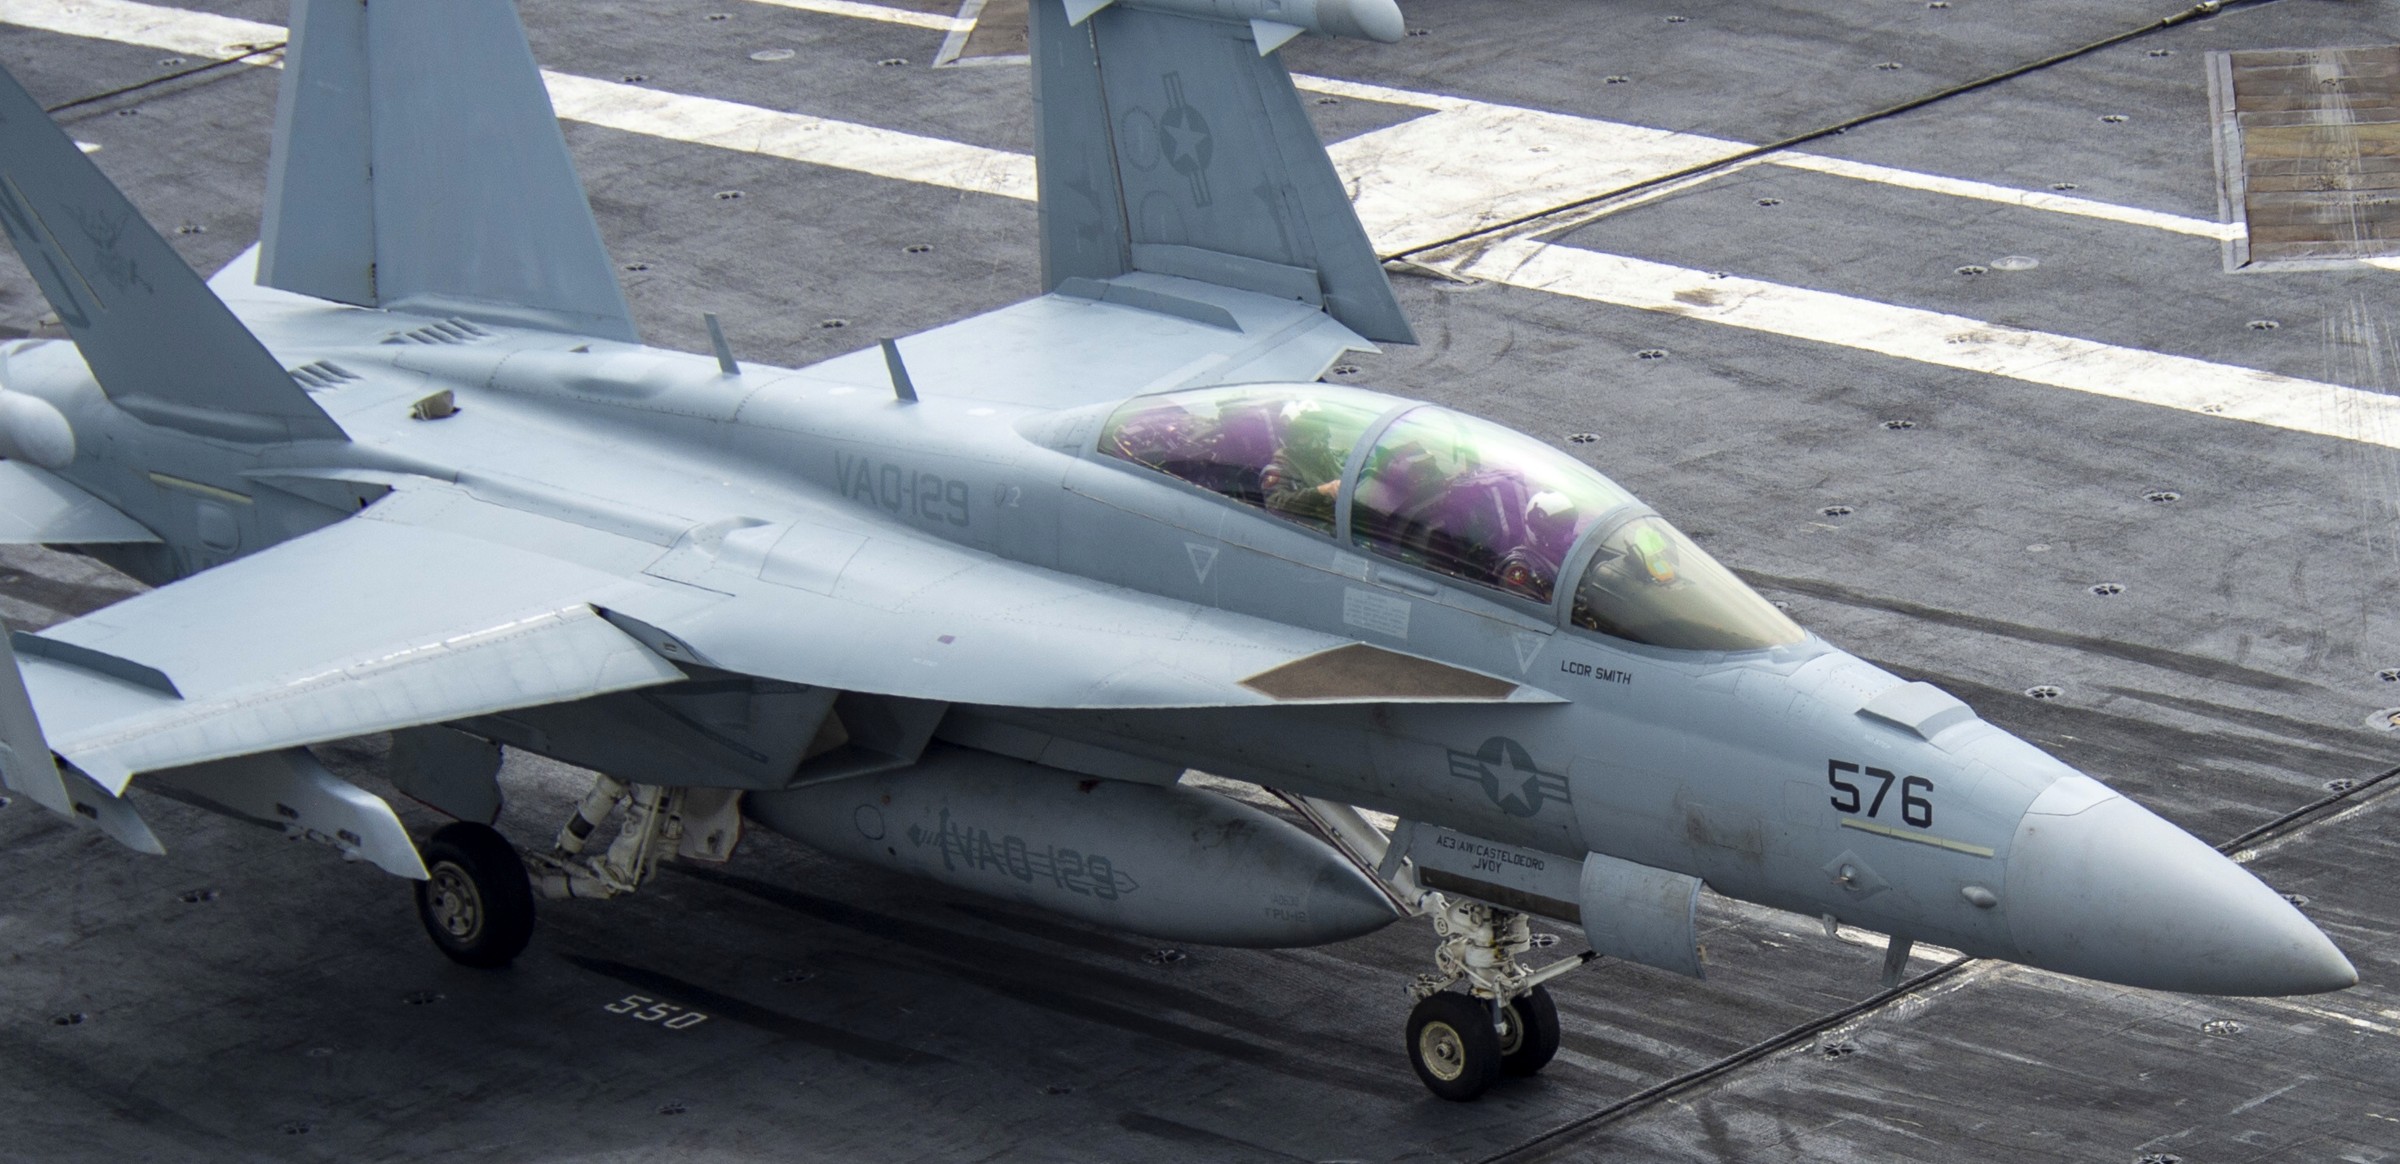 vaq-129 vikings electronic attack squadron fleet replacement frs us navy ea-18g growler 17